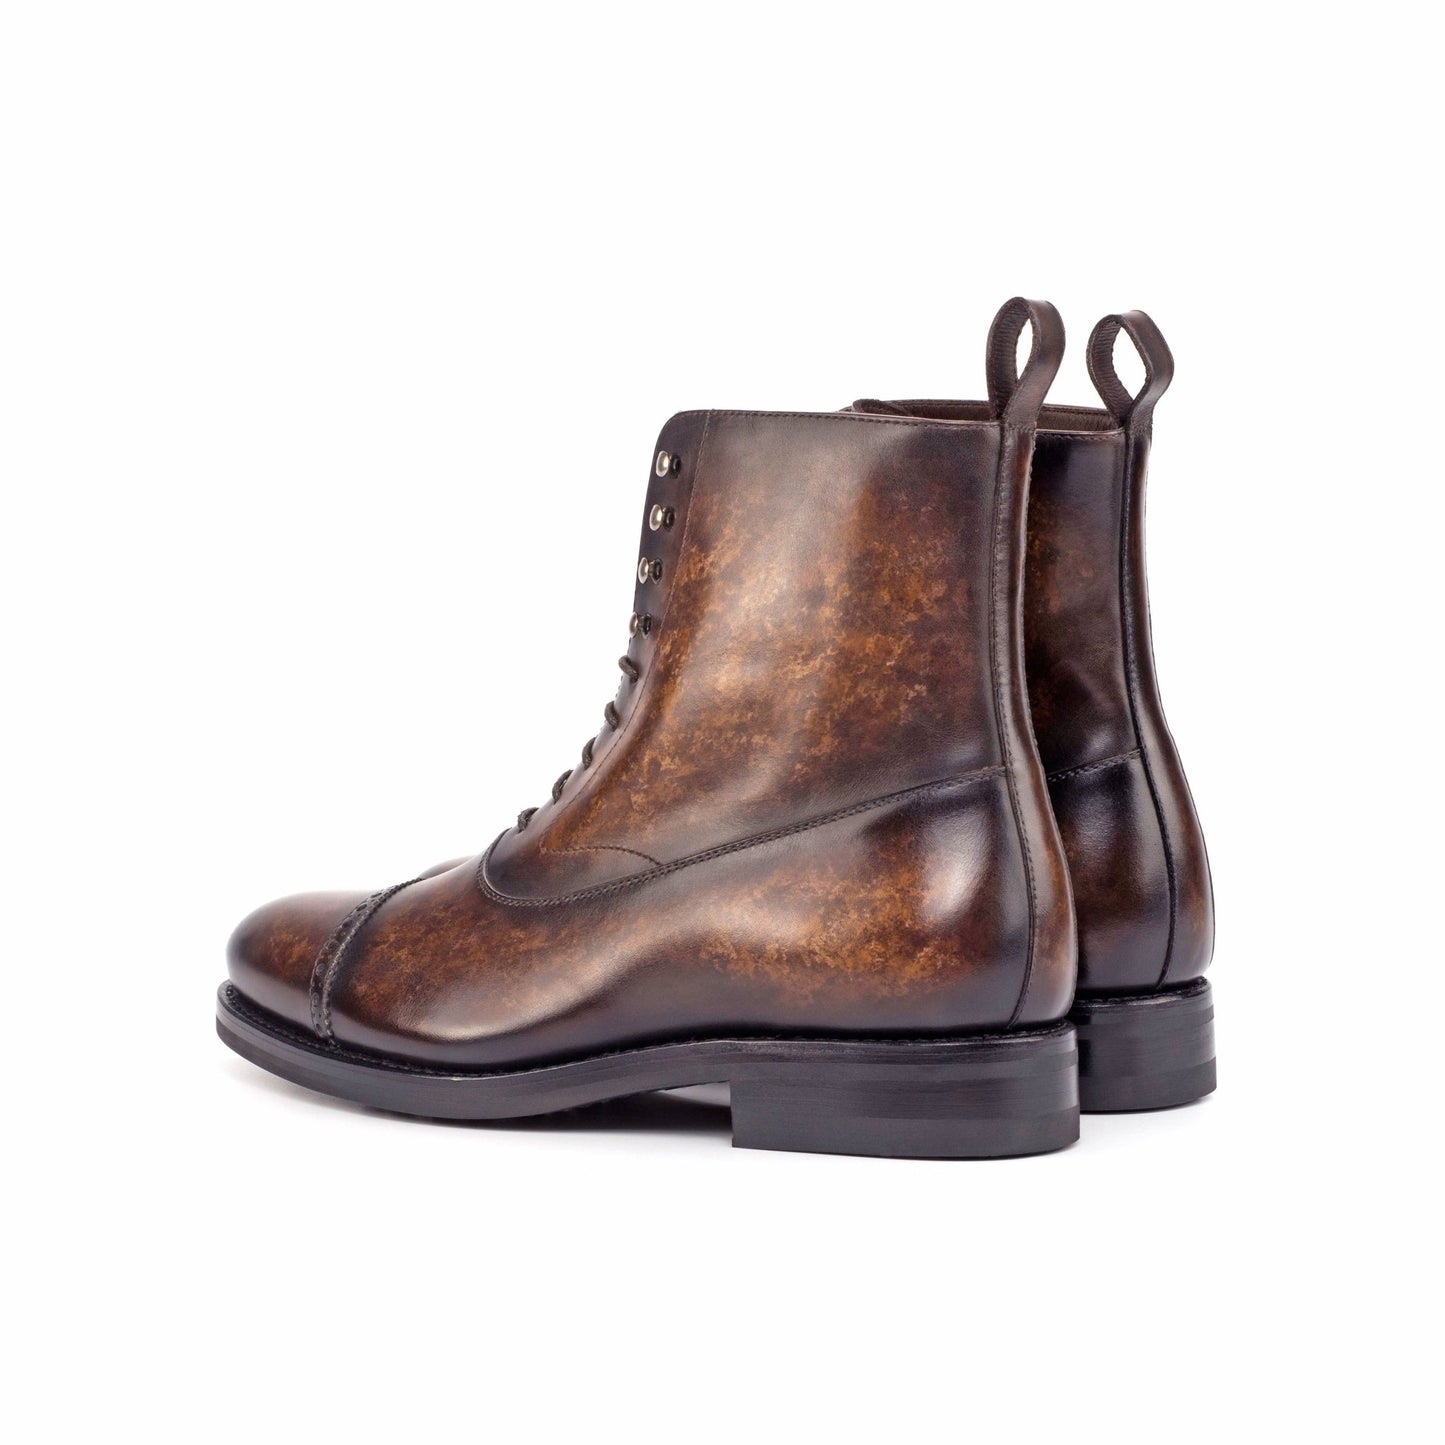 Balmoral Boot in Brown Marble Patina Box Calf - Zatorres | Free Shipping on orders over $200